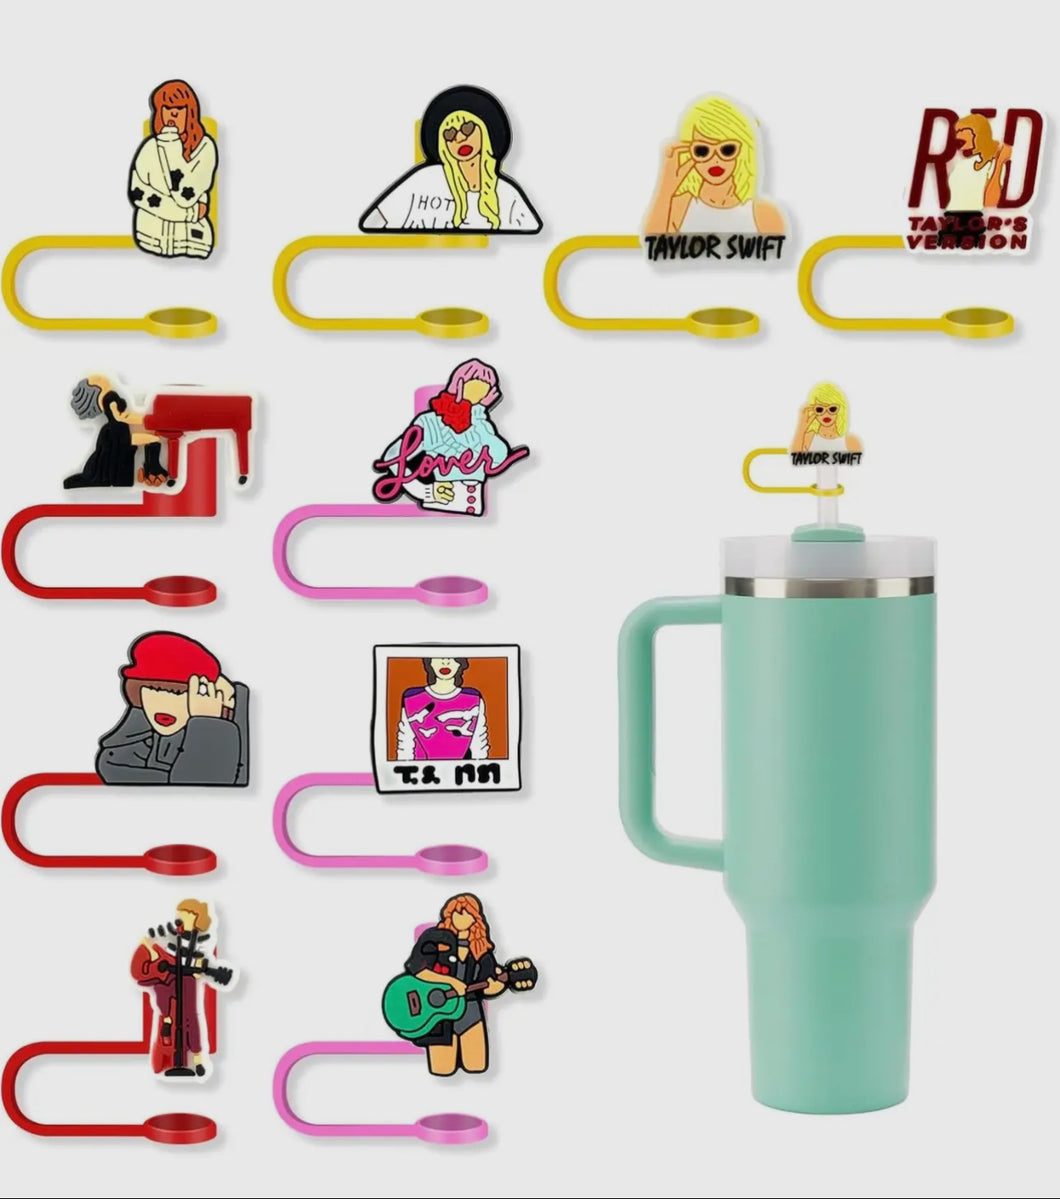 Taylor Swift Straw Toppers